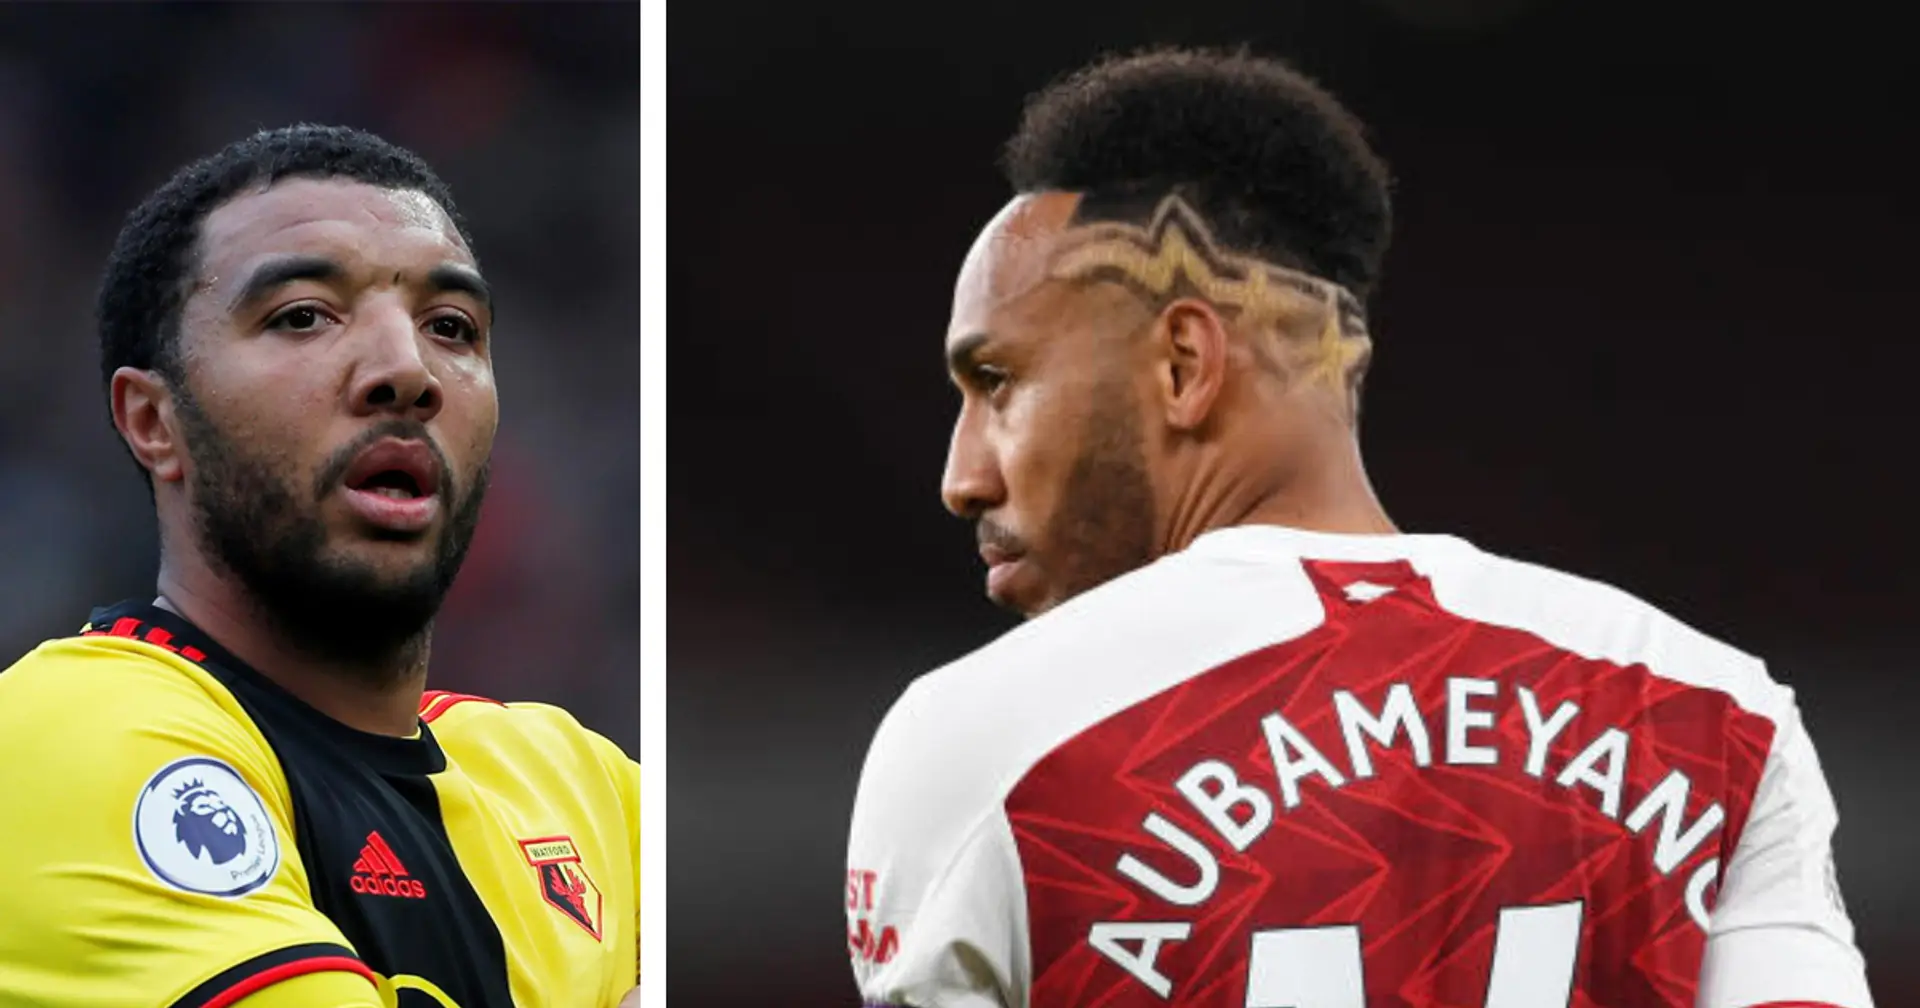 'I would put my money on him to score 15-20 goals': Deeney shields Aubameyang from criticism, explains his poor form